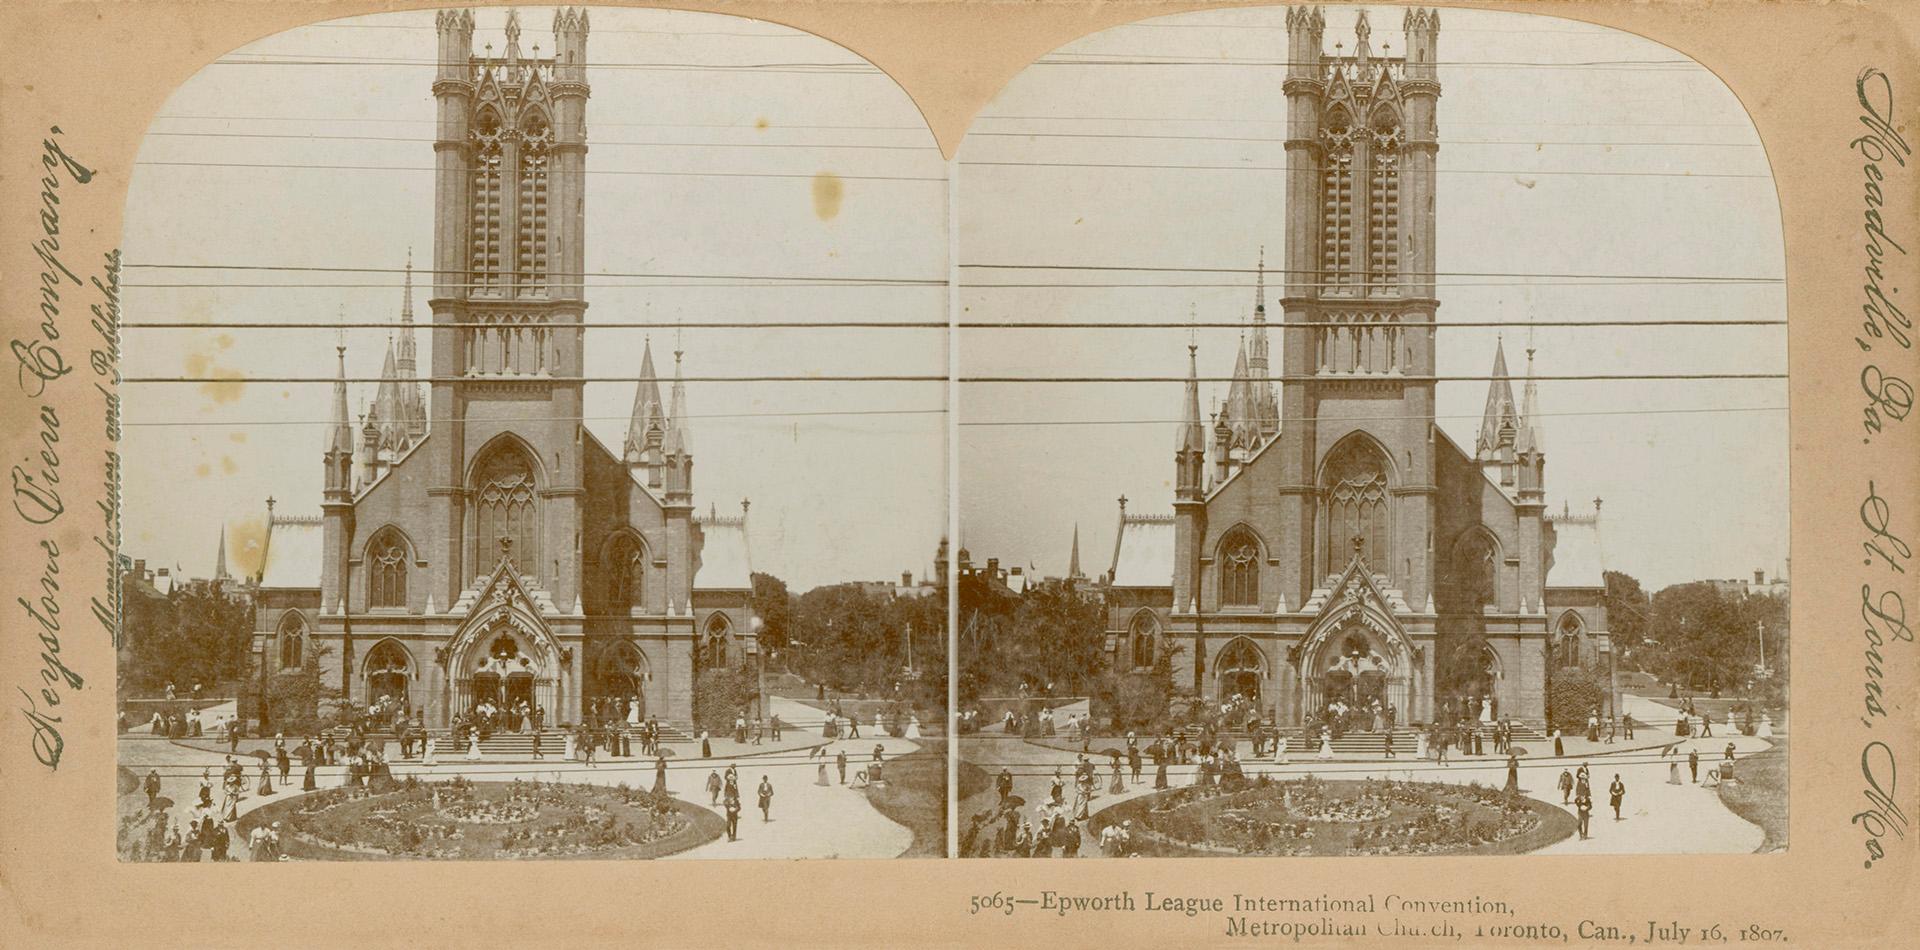 Pictures show the outside of a large, Neo-Gothic style church in a city.